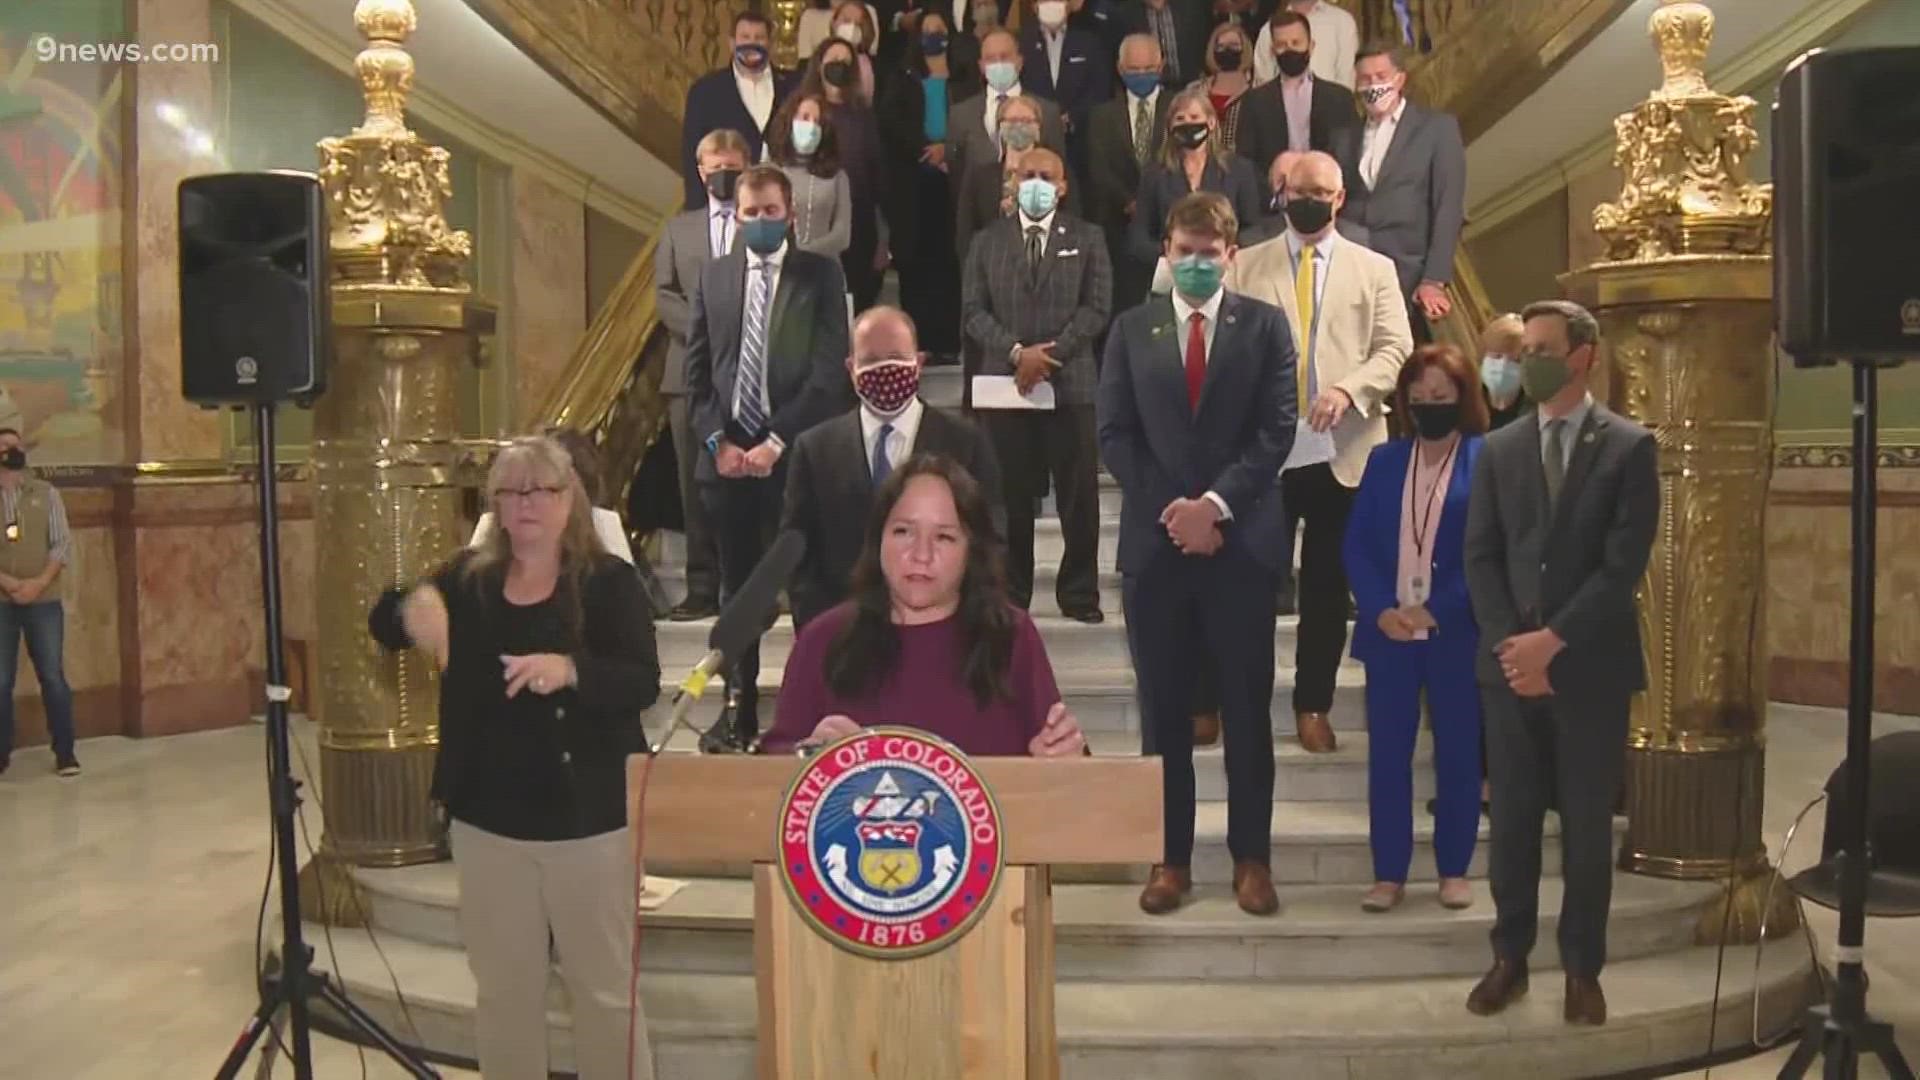 Gov. Jared Polis (D-Colo.), legislative and local officials announced a transportation bill that will be introduced into the Colorado legislature on Tuesday.